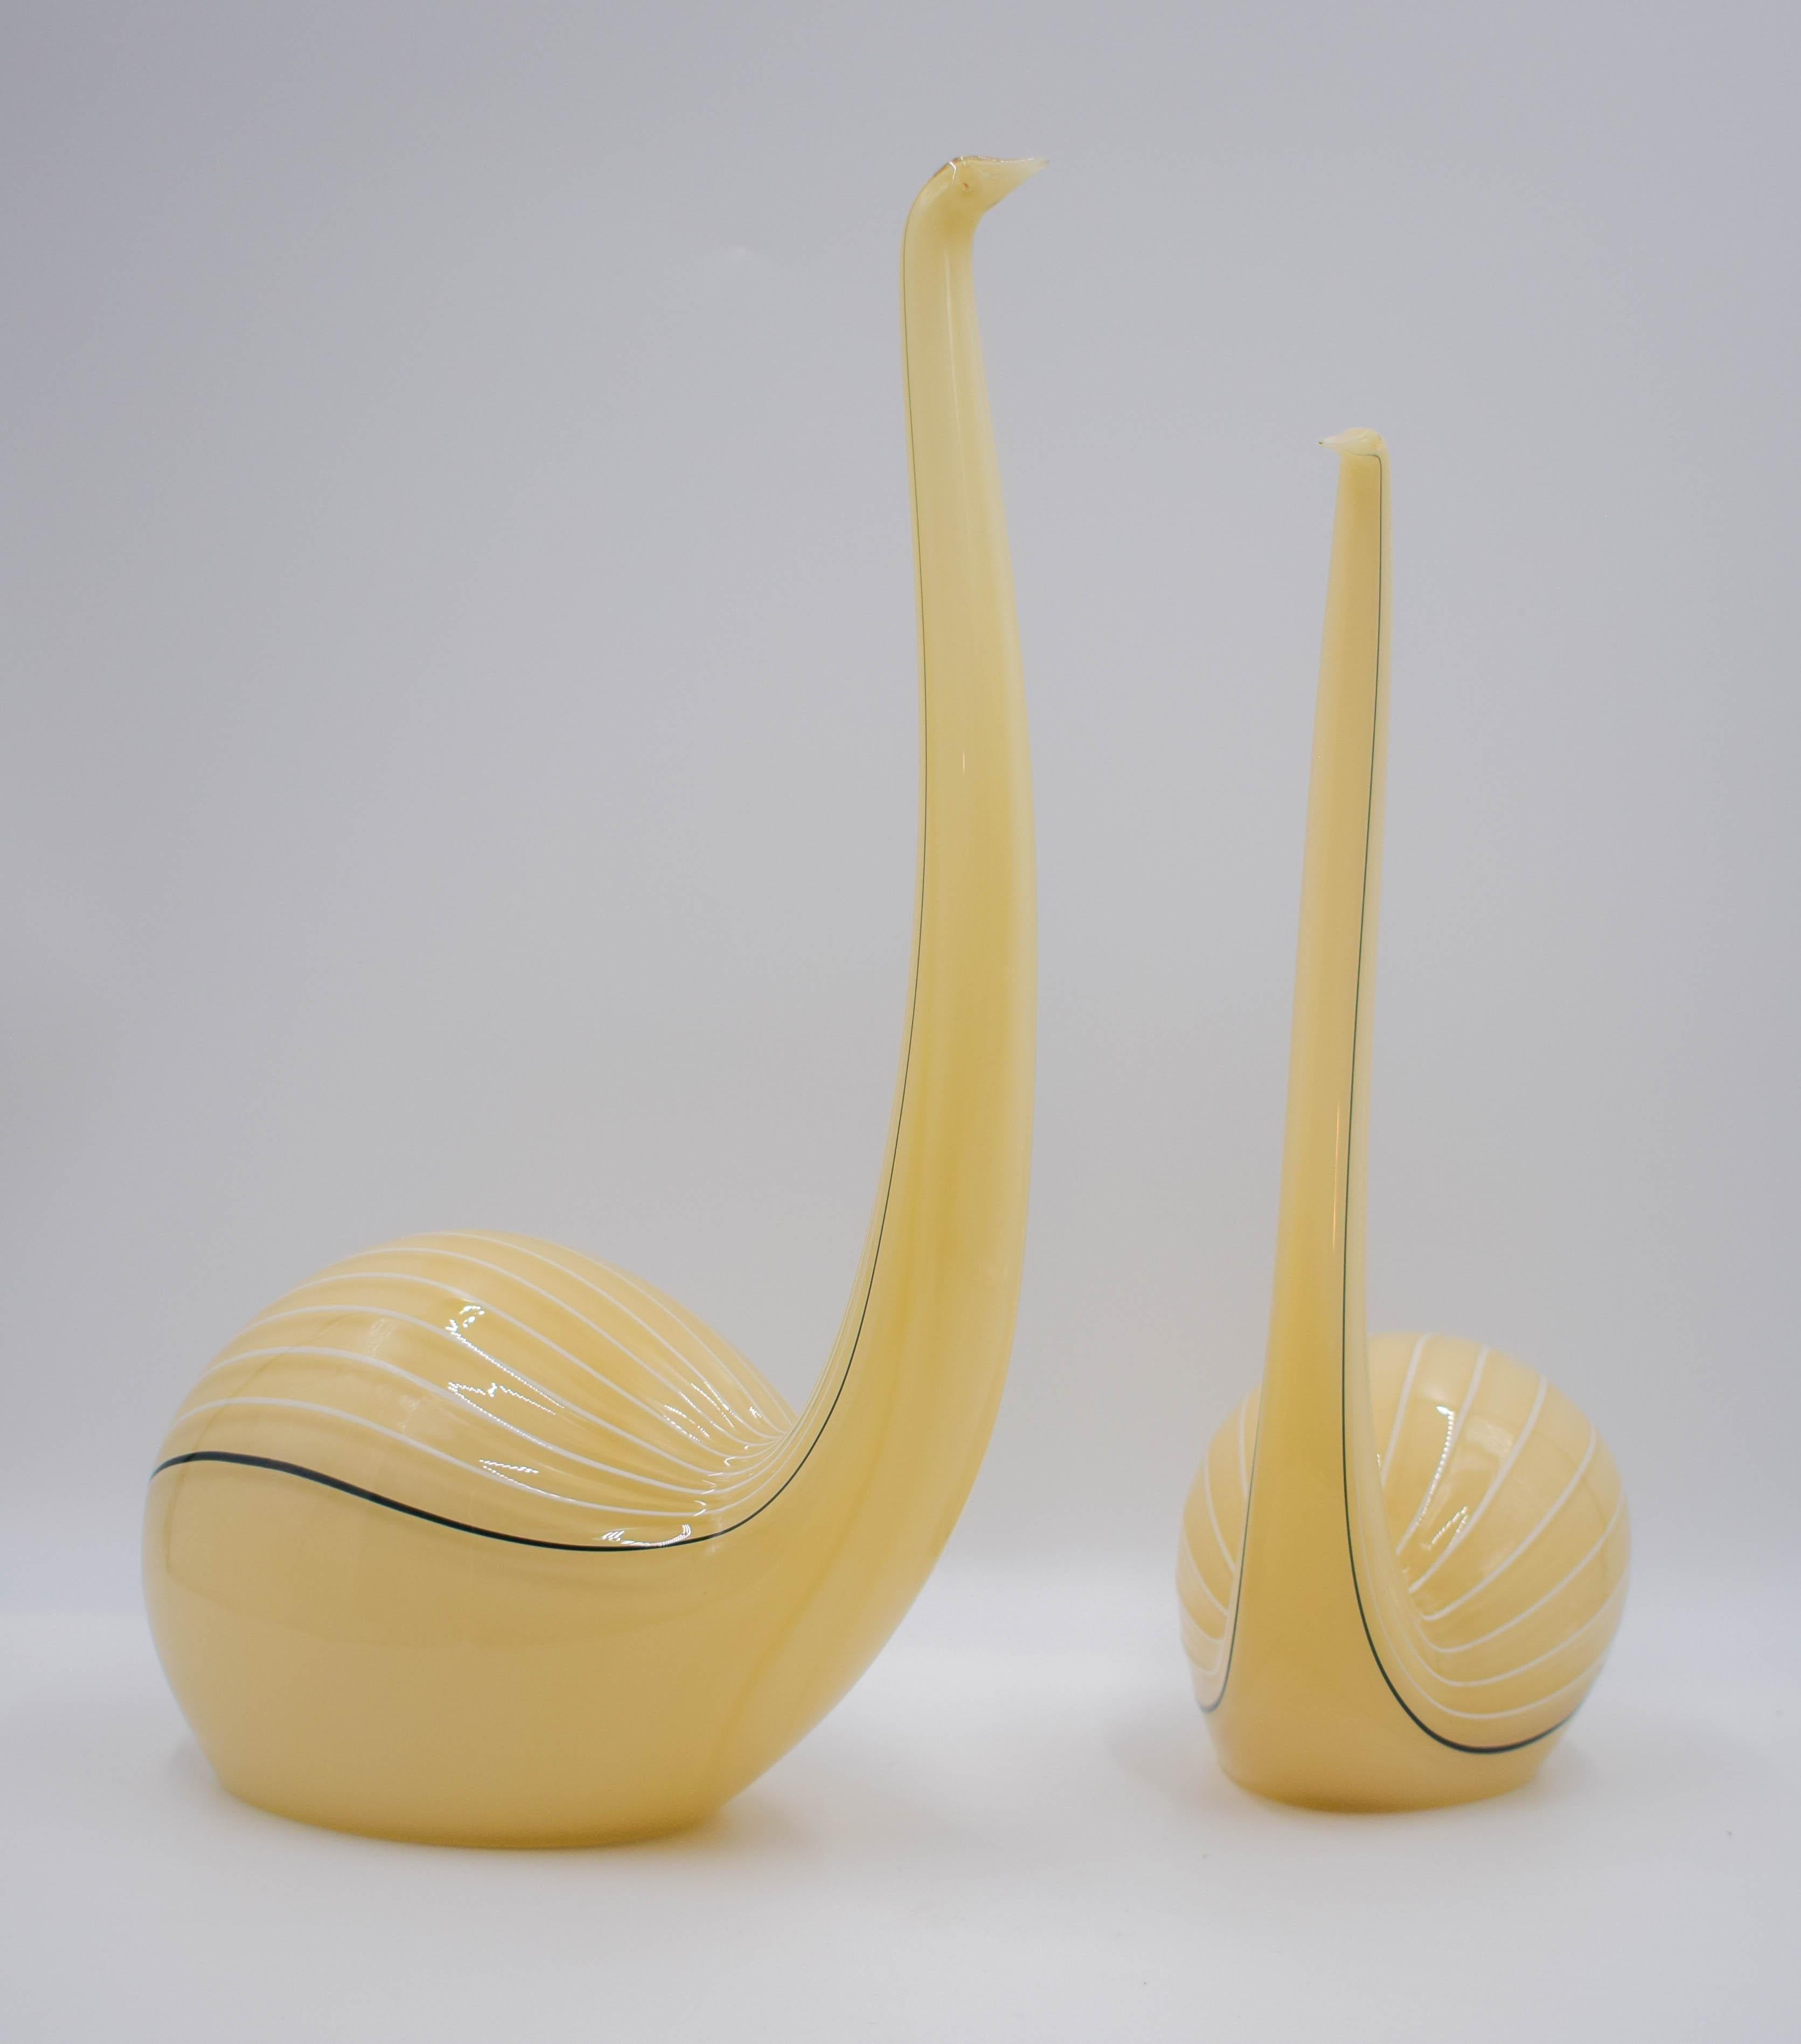 These two Seguso art glass bird sculptures are Classic midcentury Italian design from the Venetian island of Murano. Sleek with long necks and bulbous bodies, each is blown in custard colored glass white and brown decoration and signed. Both are in